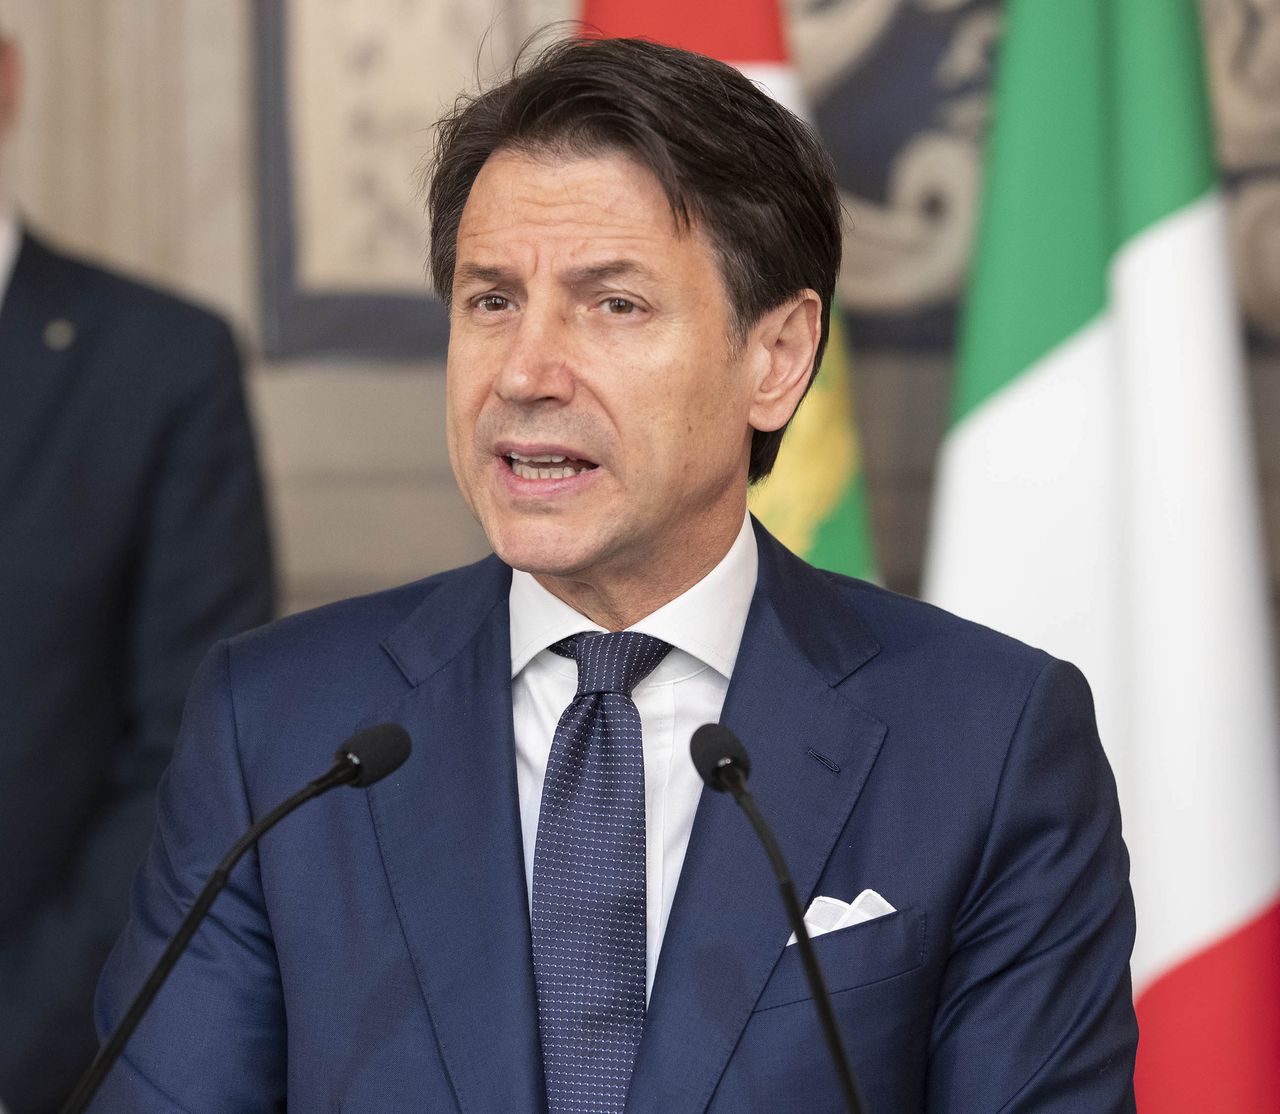 Lockdown will be prolonged, says Italian Prime Minister